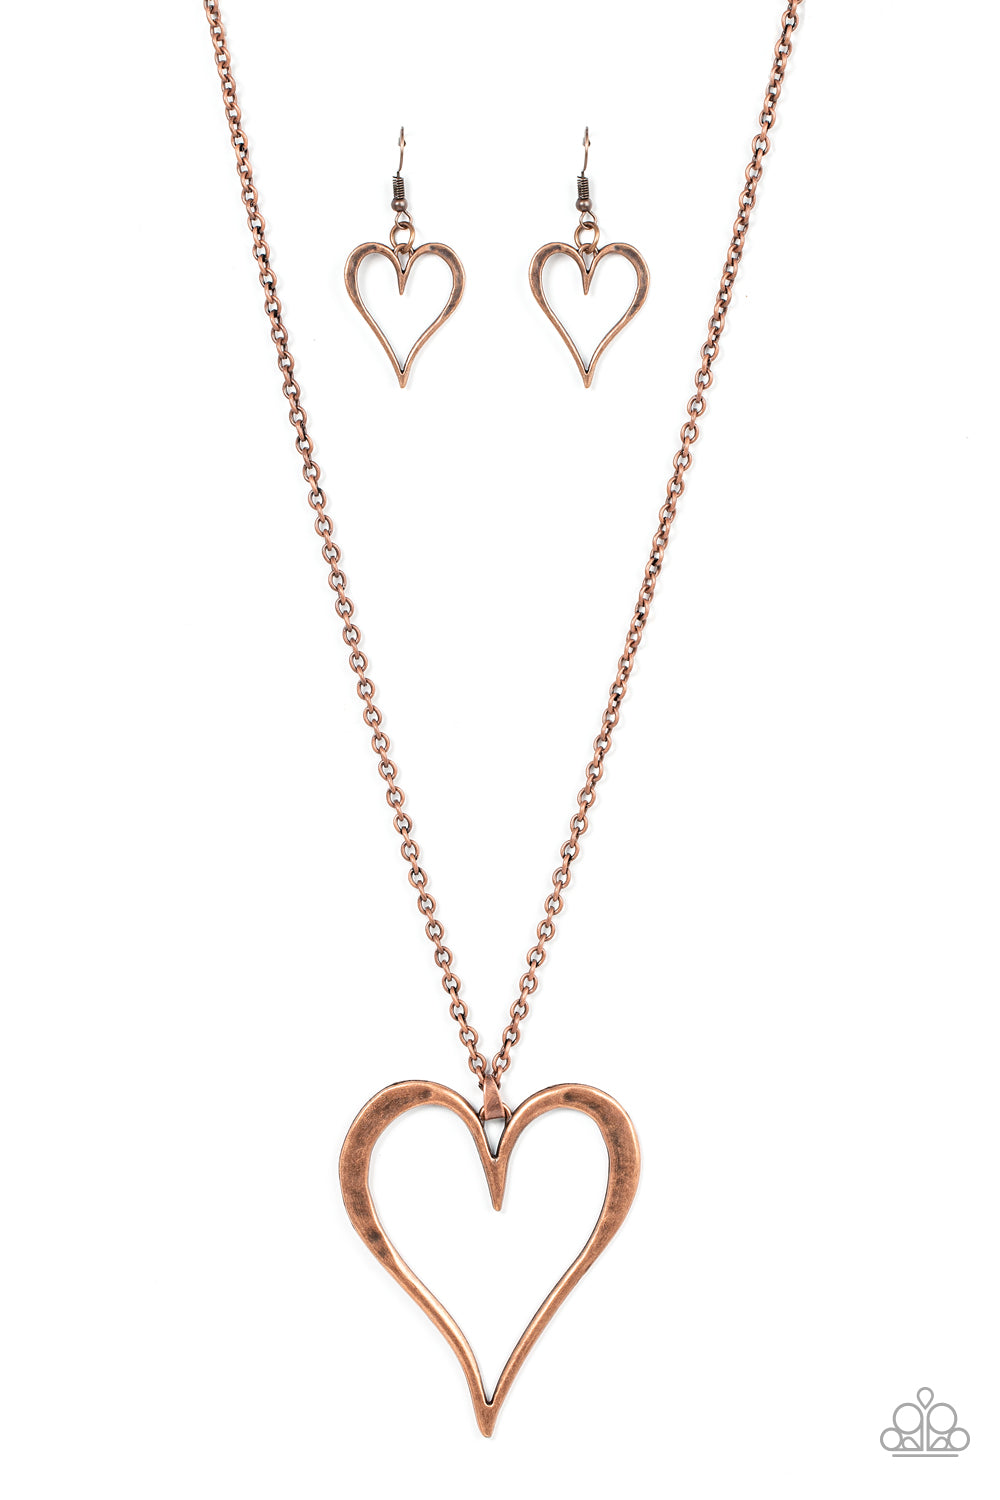 Paparazzi Accessories Hopelessly In Love - Copper